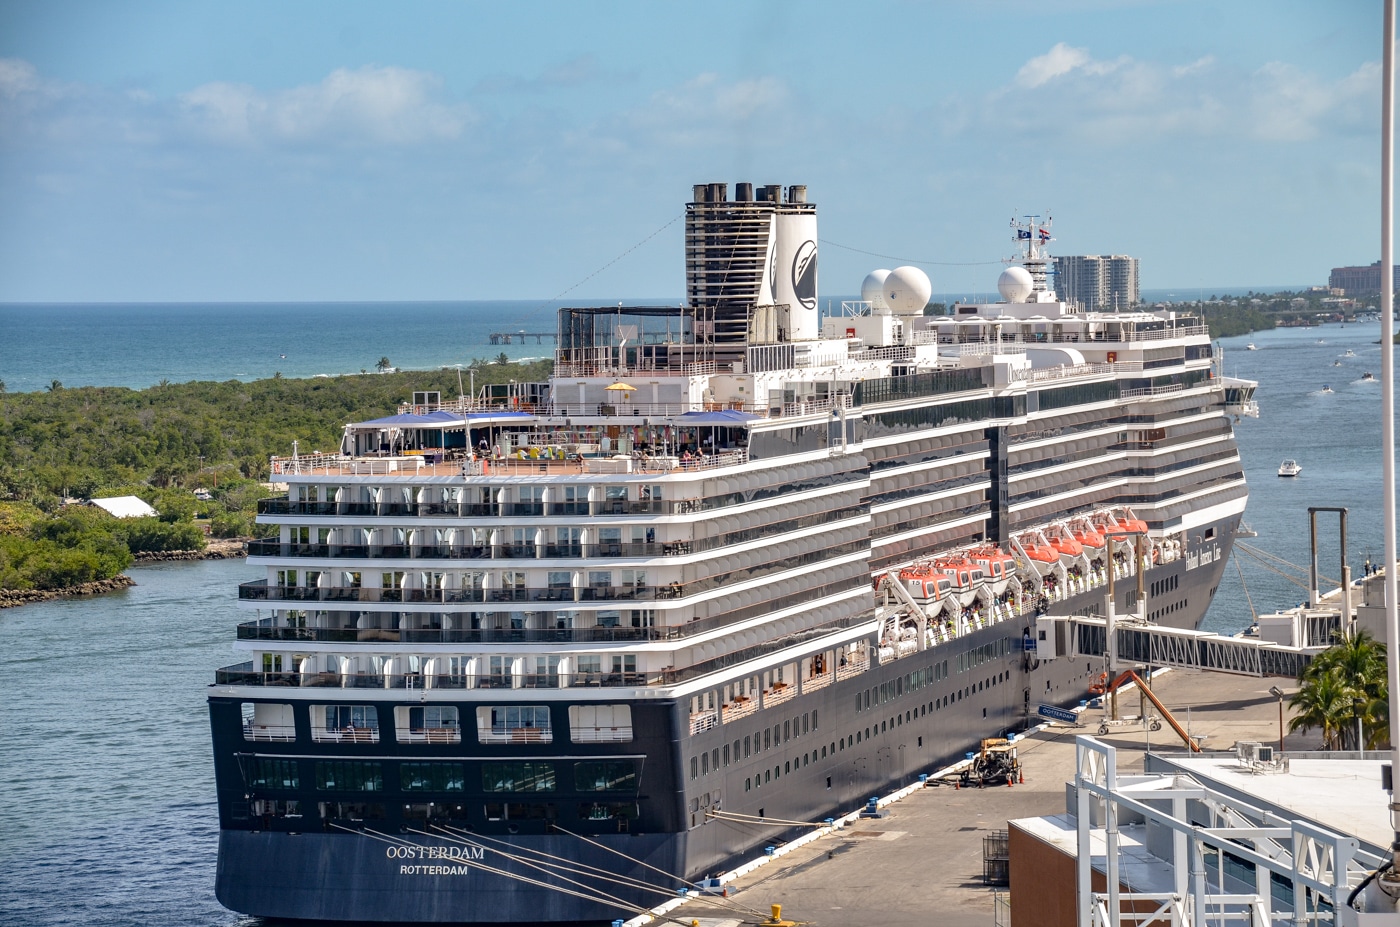 Holland America Oosterdam in Port Canaveral Florida